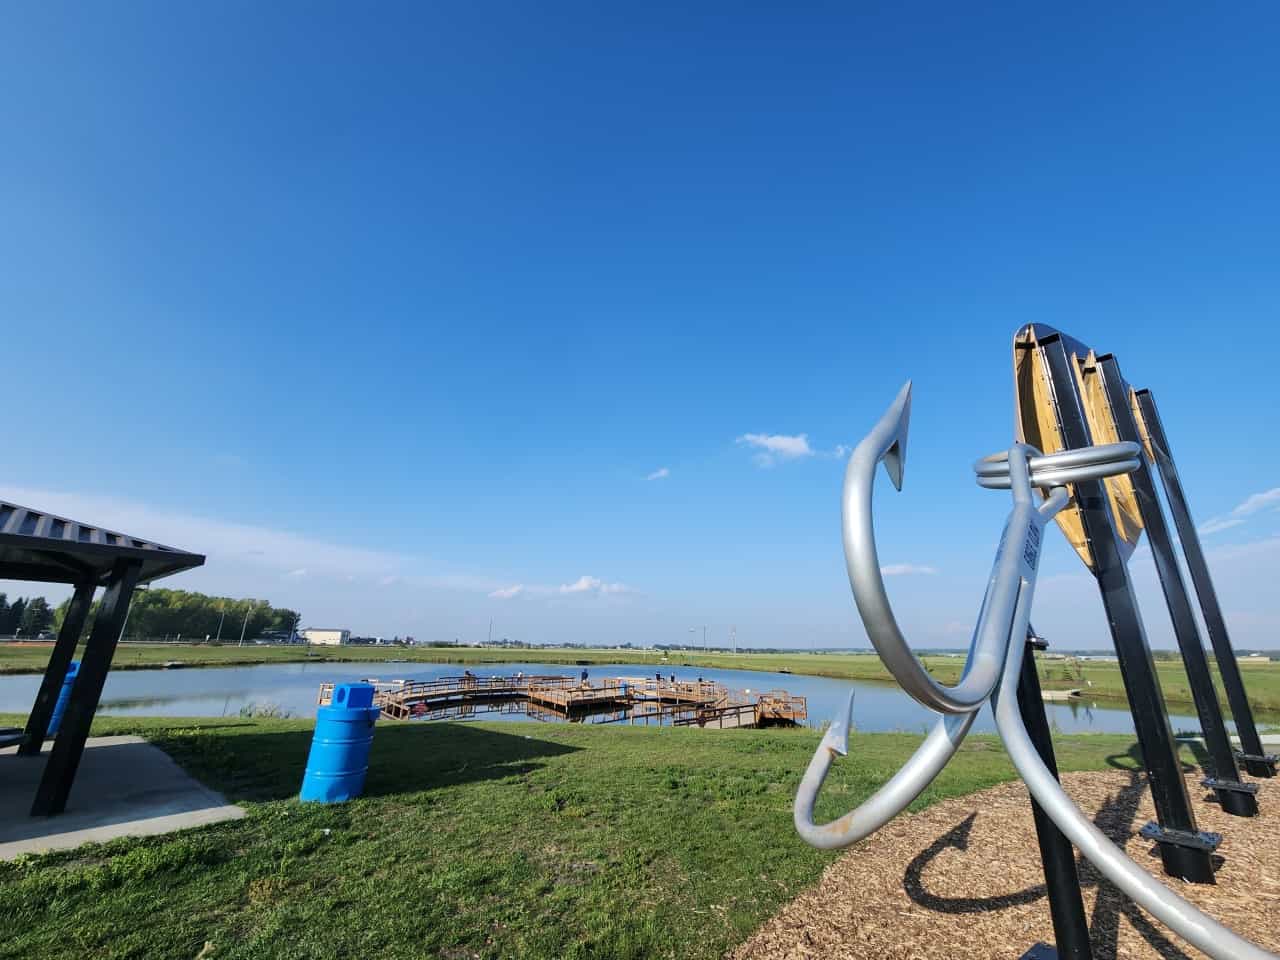 Picnic Tables, Fishing Pond and the World's Largest Fishing Lure  - Have a picnic, catch a fish and enjoy the World's Largest Fishing Lure at the Len Thompson Trout Pond in Lacombe Alberta 